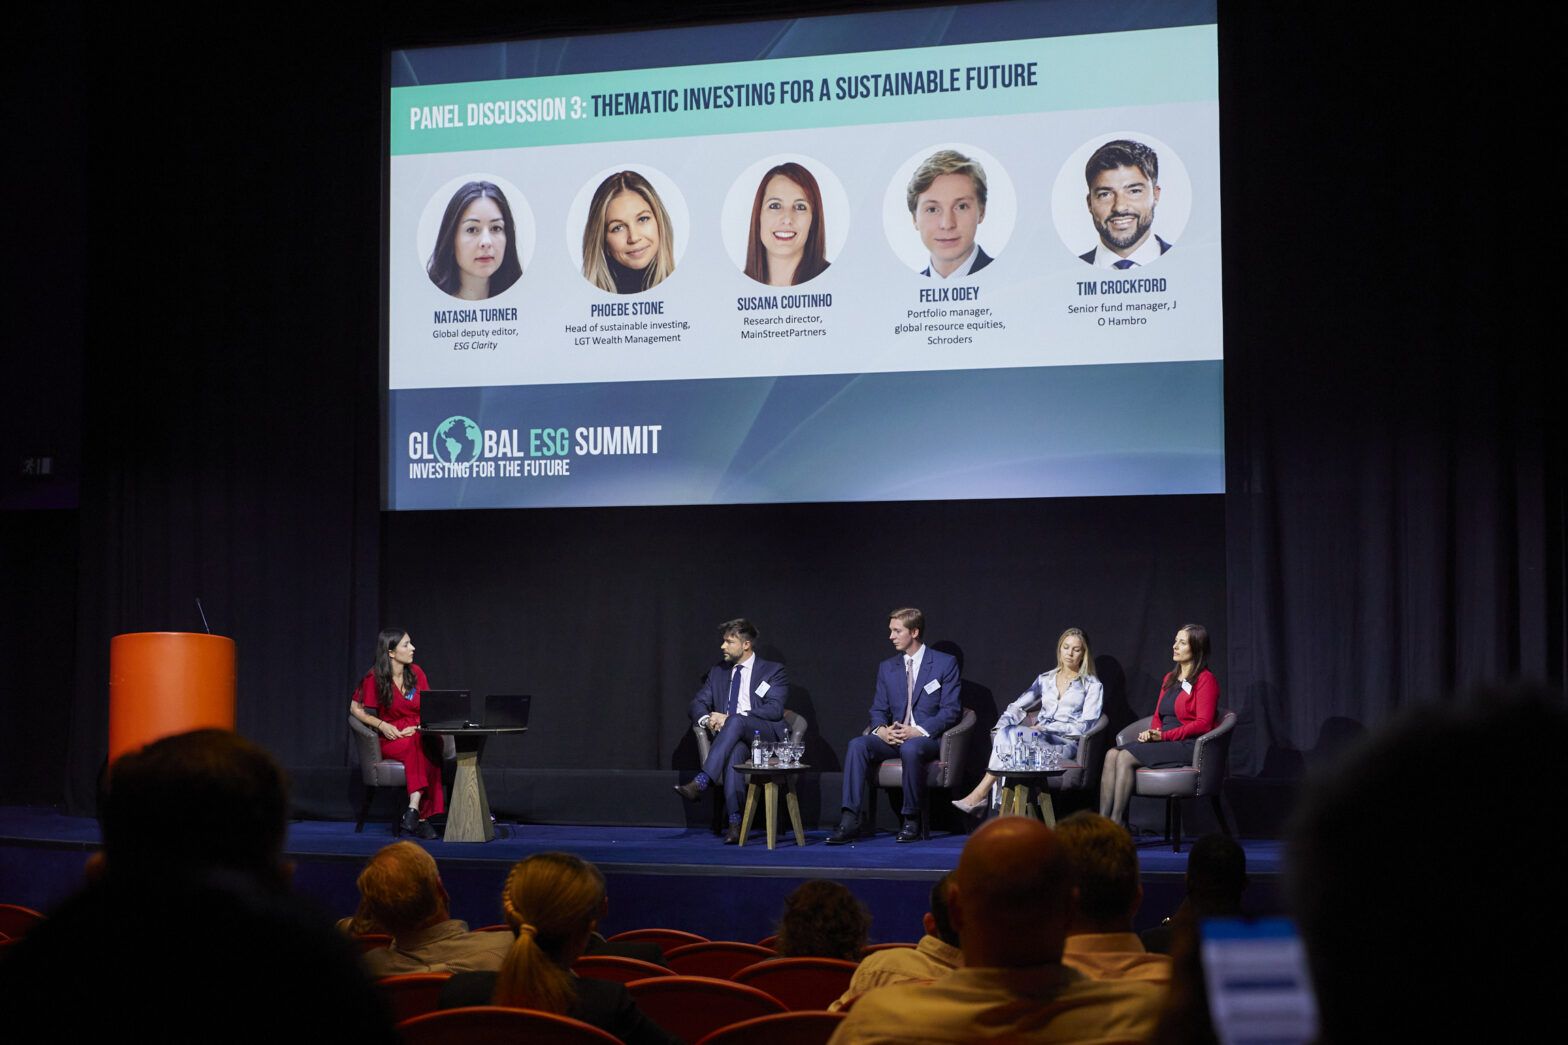 Global ESG Summit: Themes to watch for sustainable investors